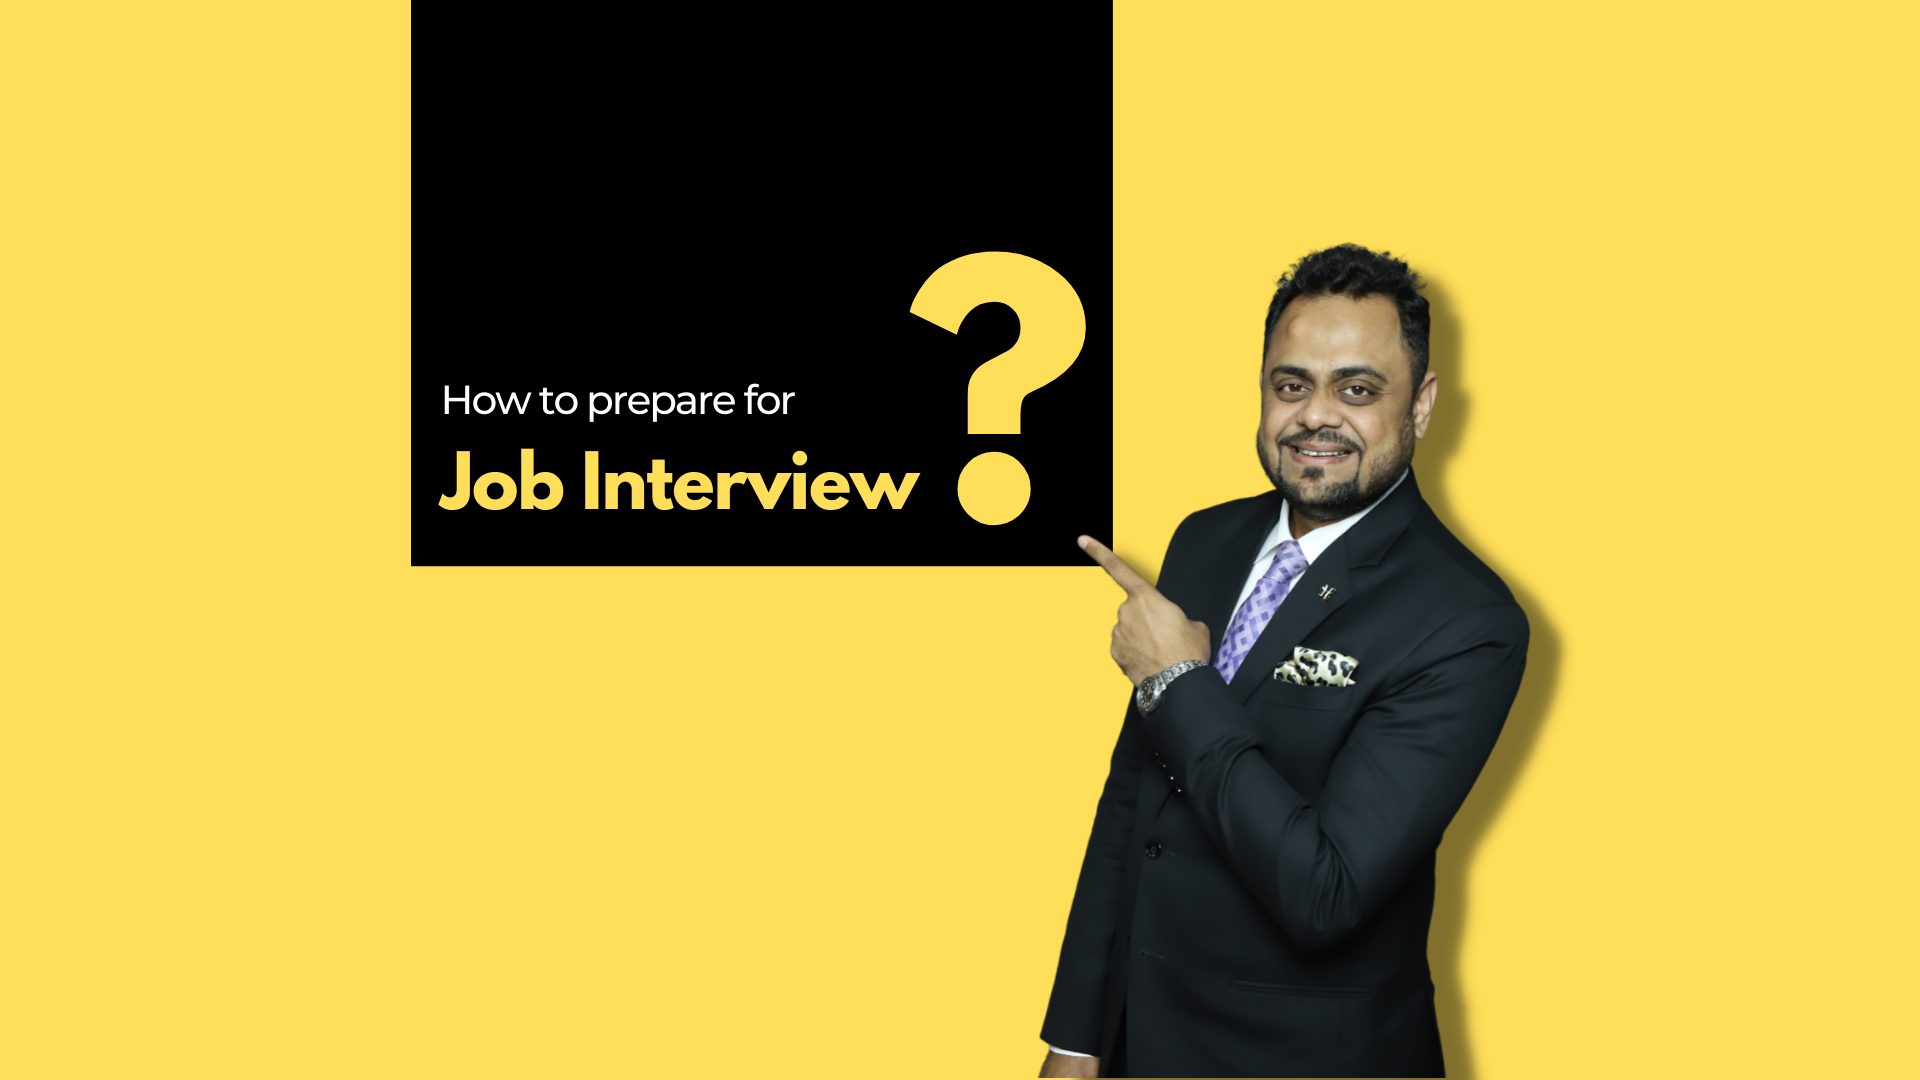 How to prepare for Job Interview course image